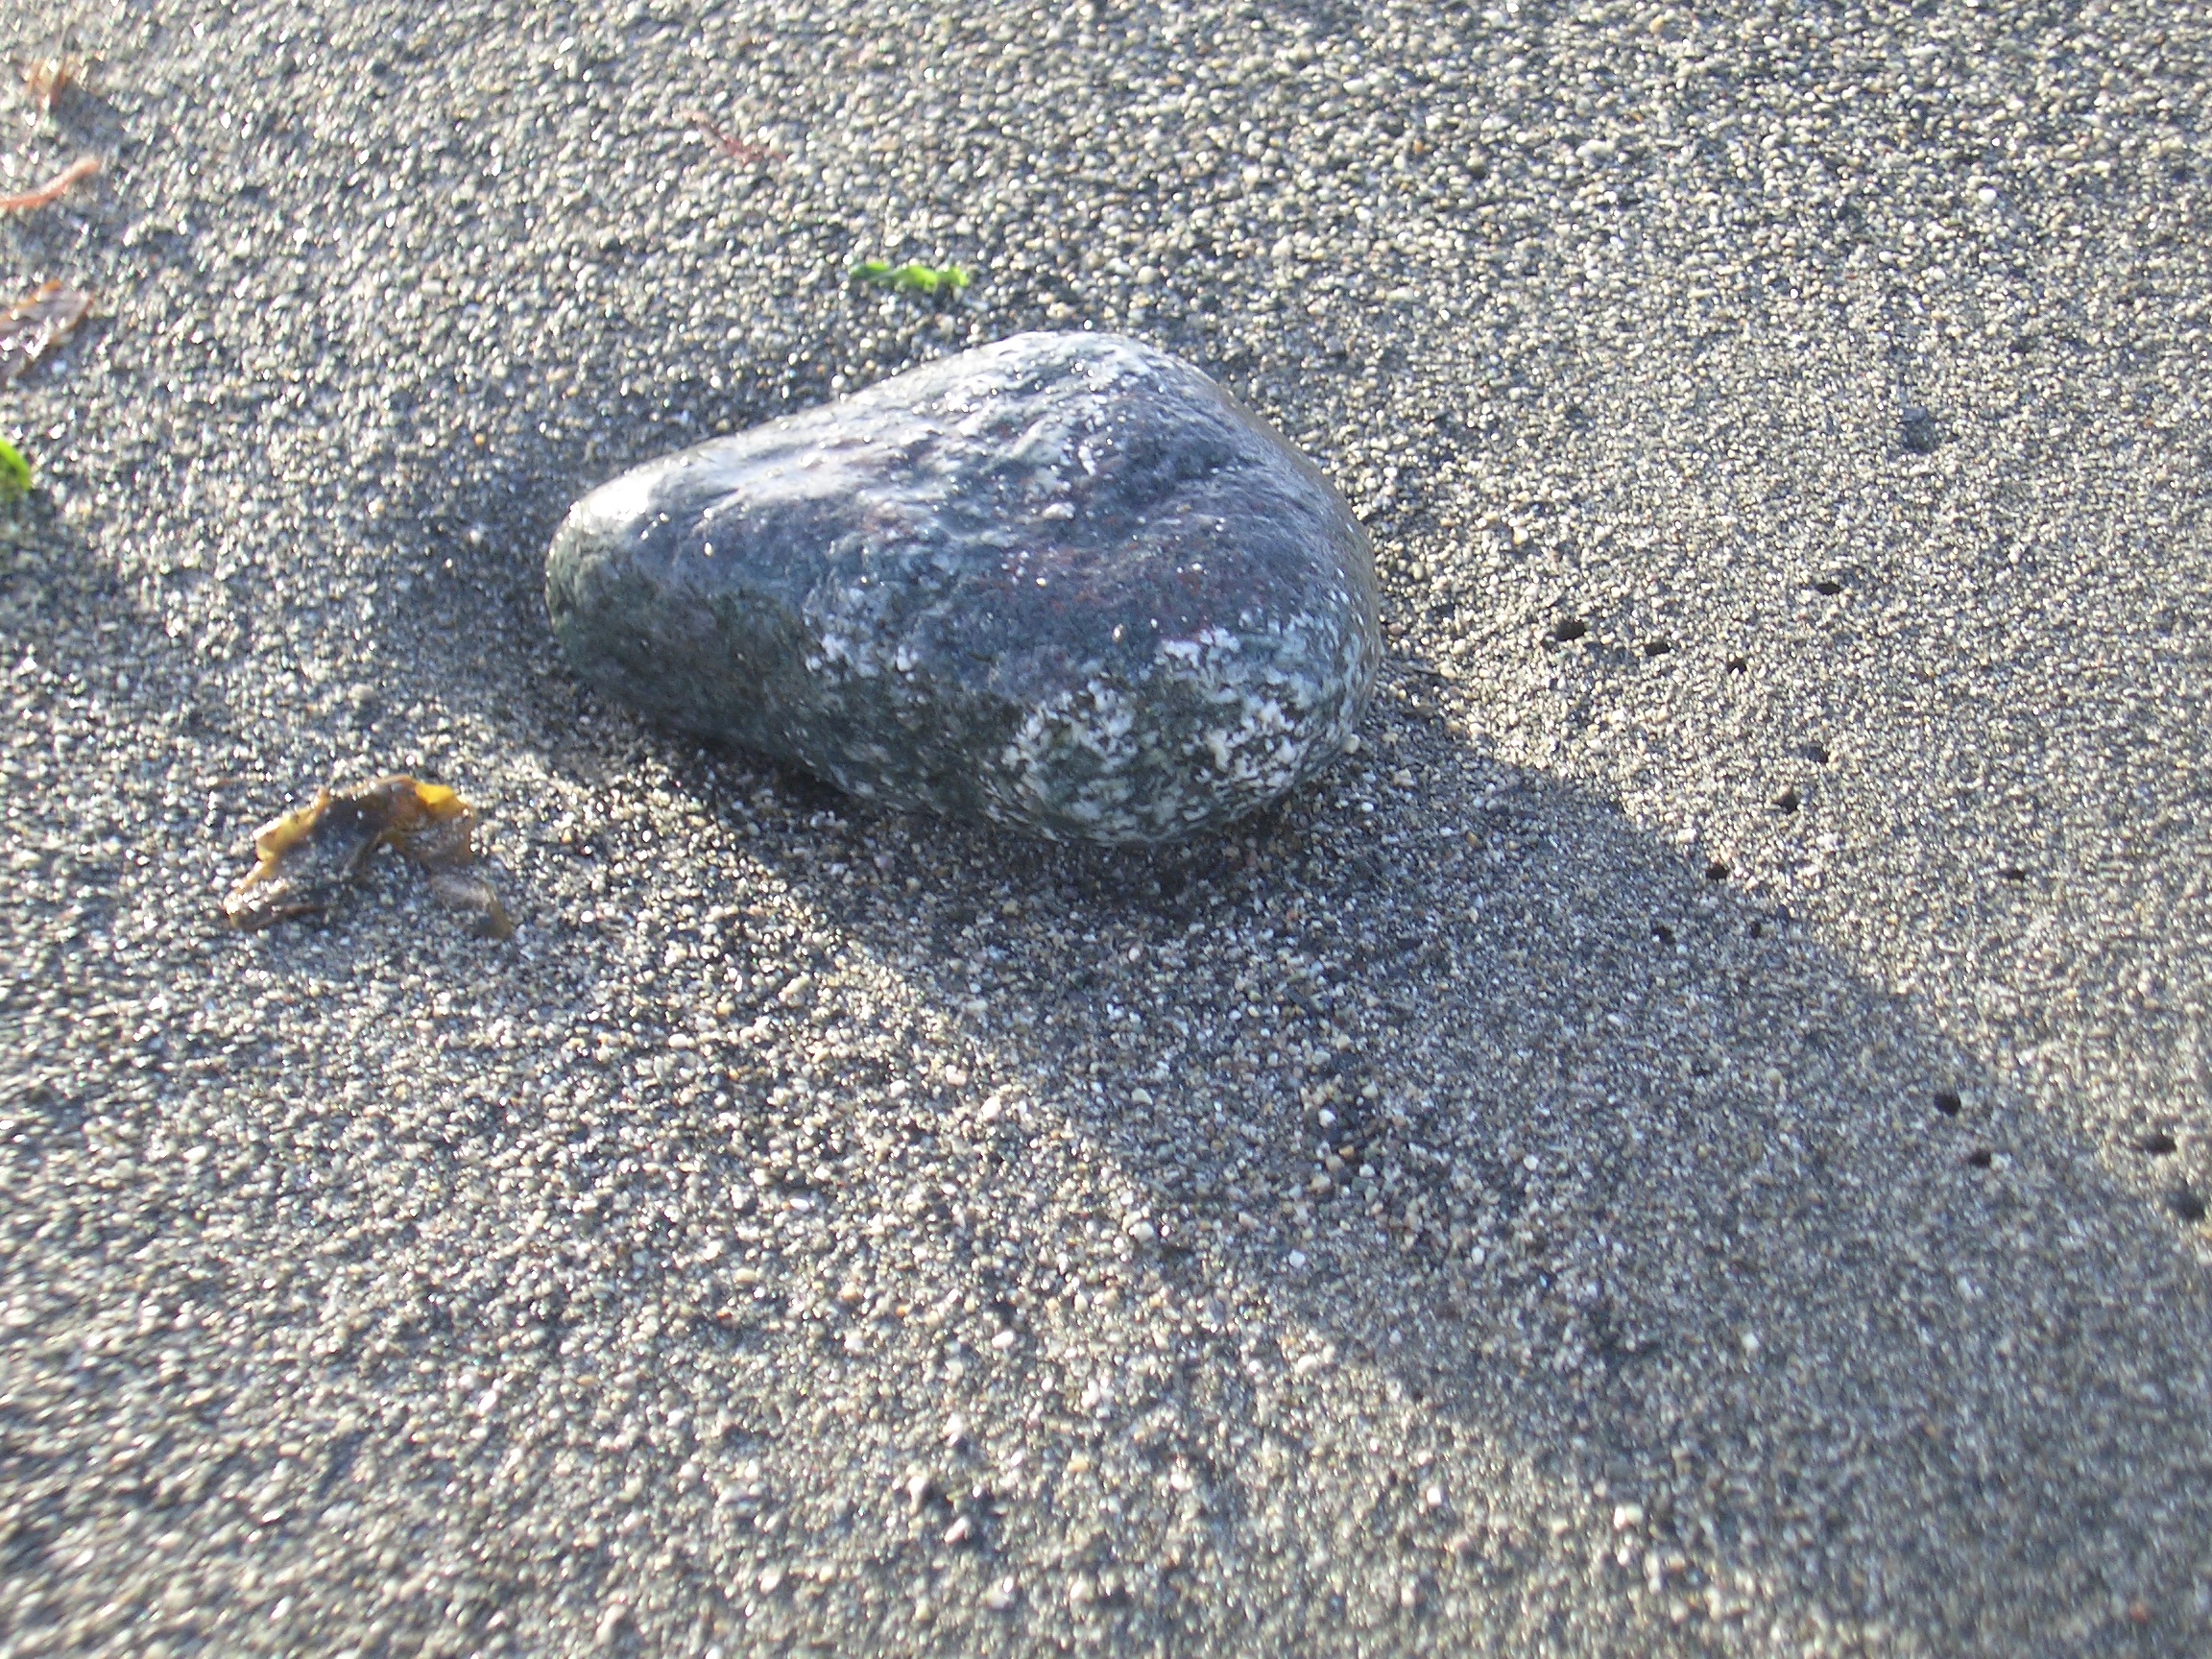 Small rock on the beach [image 500x375 pixels]